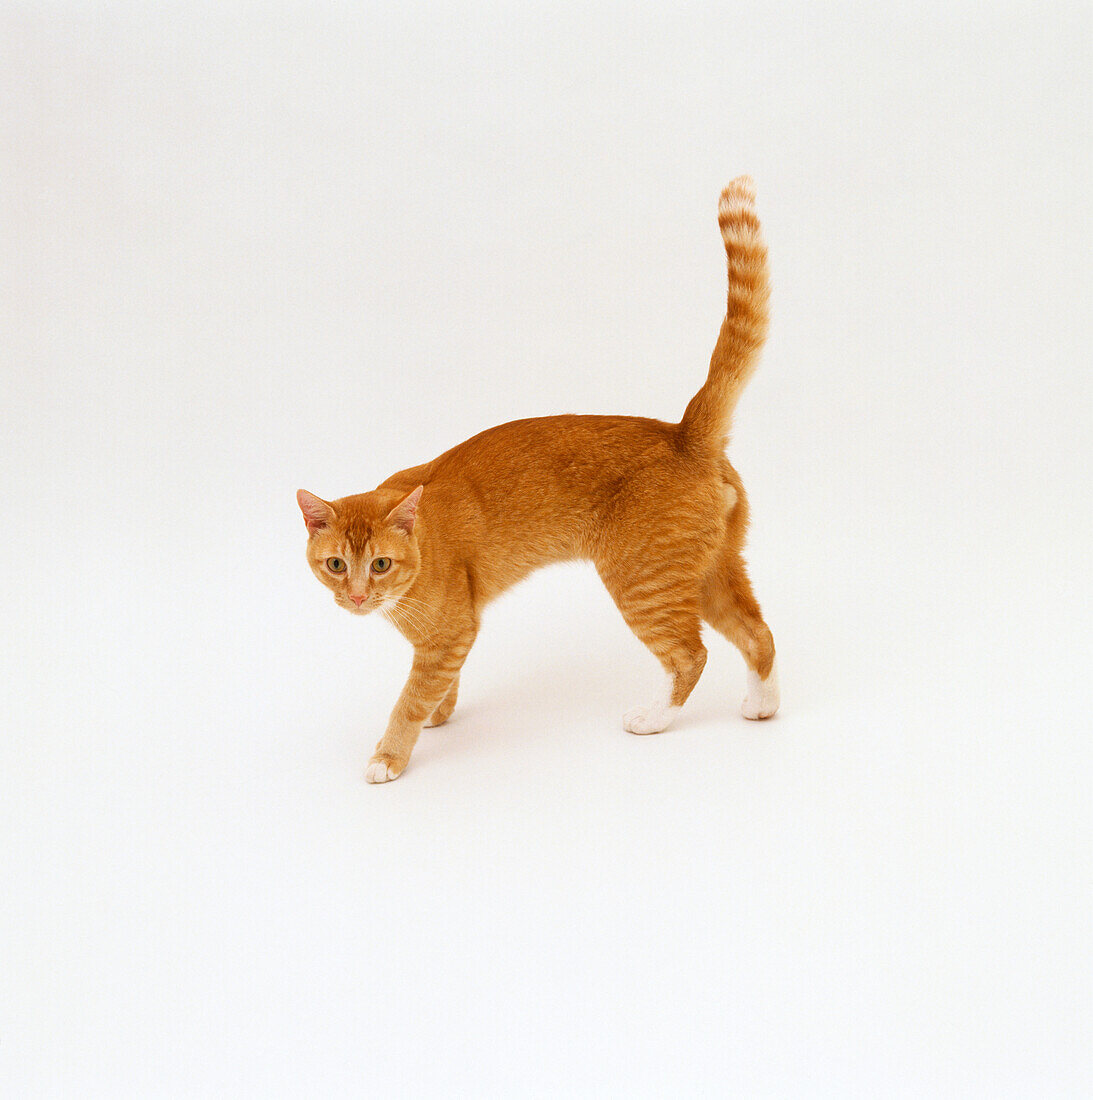 Ginger tom cat tail pointing straight up